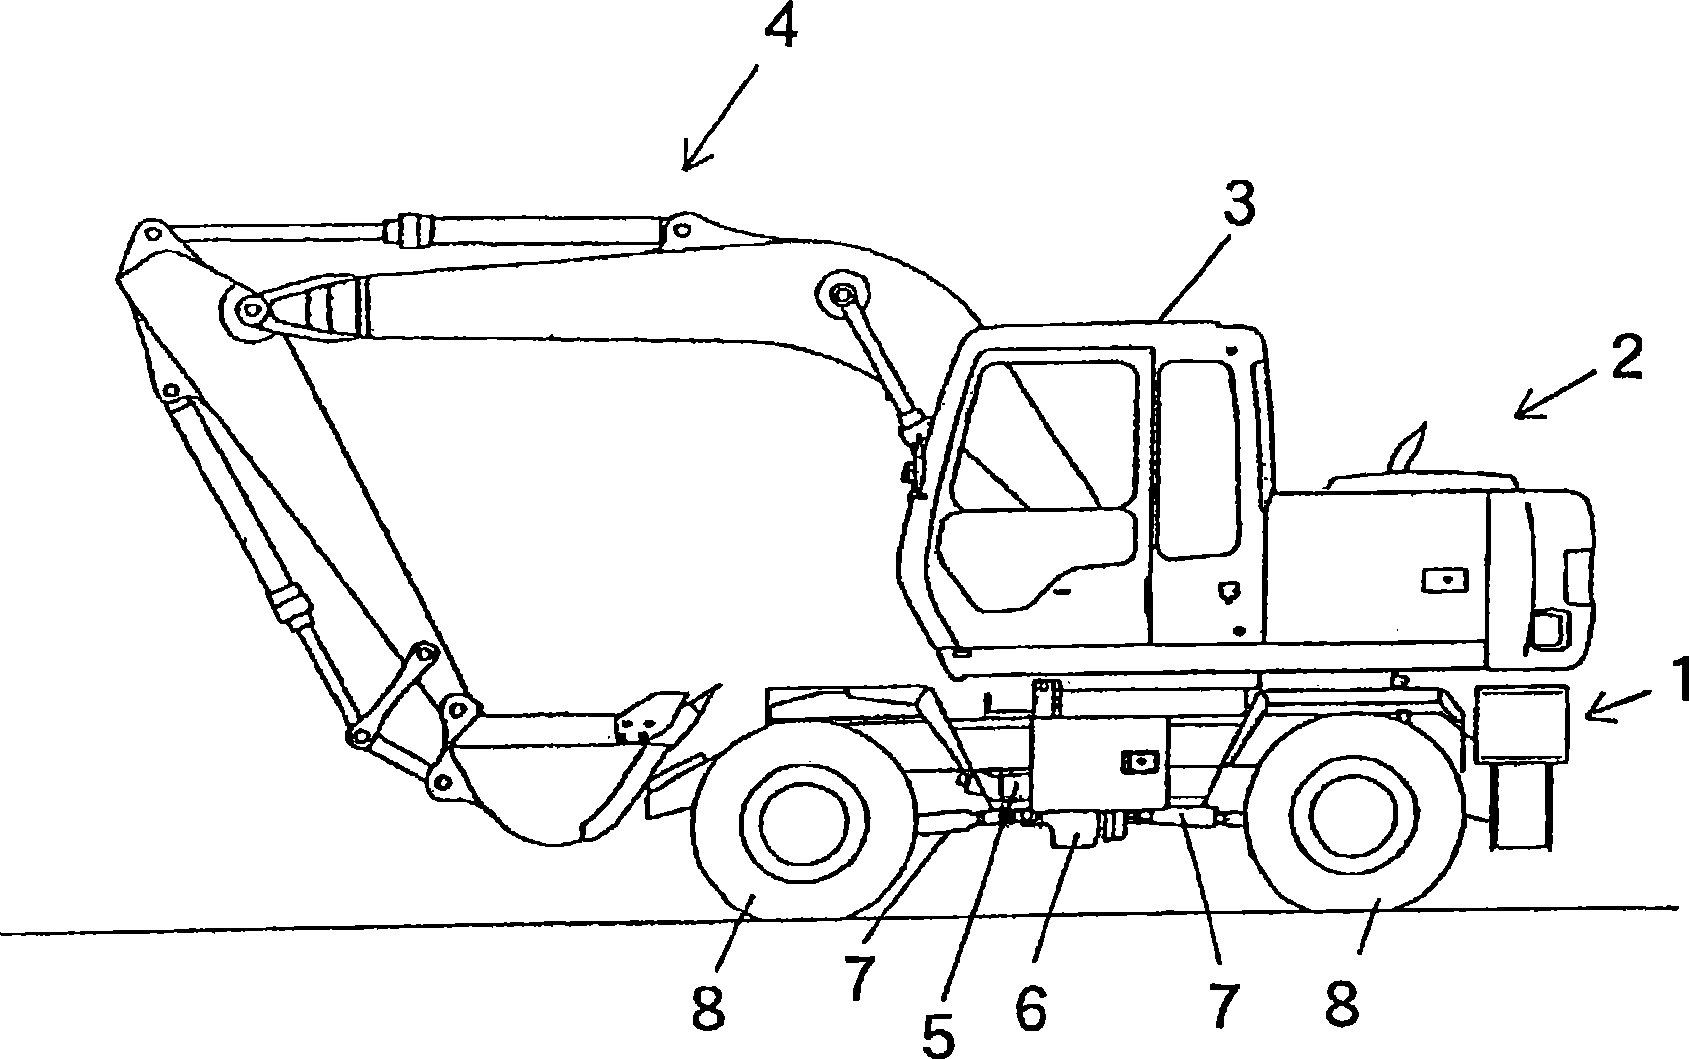 Travel controller of hydraulic drive vehicle